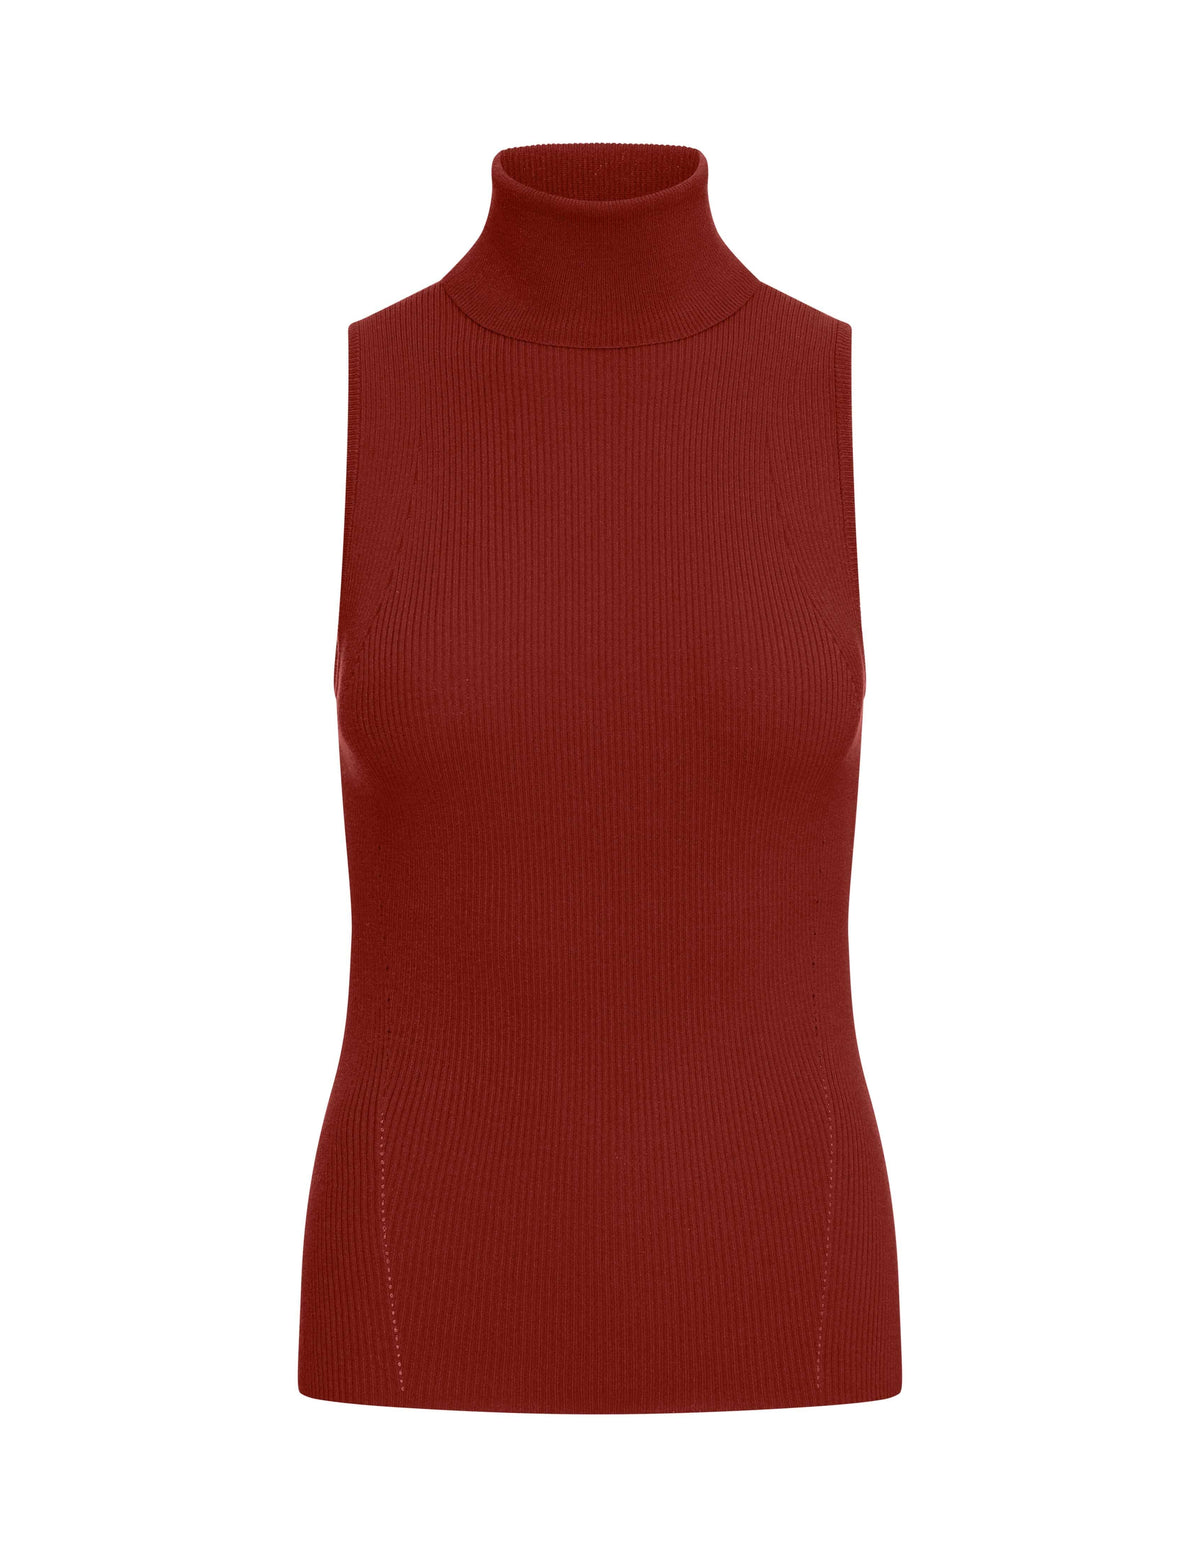 Anne Klein Titian Red Sleeveless Rib Turtleneck- Clearance